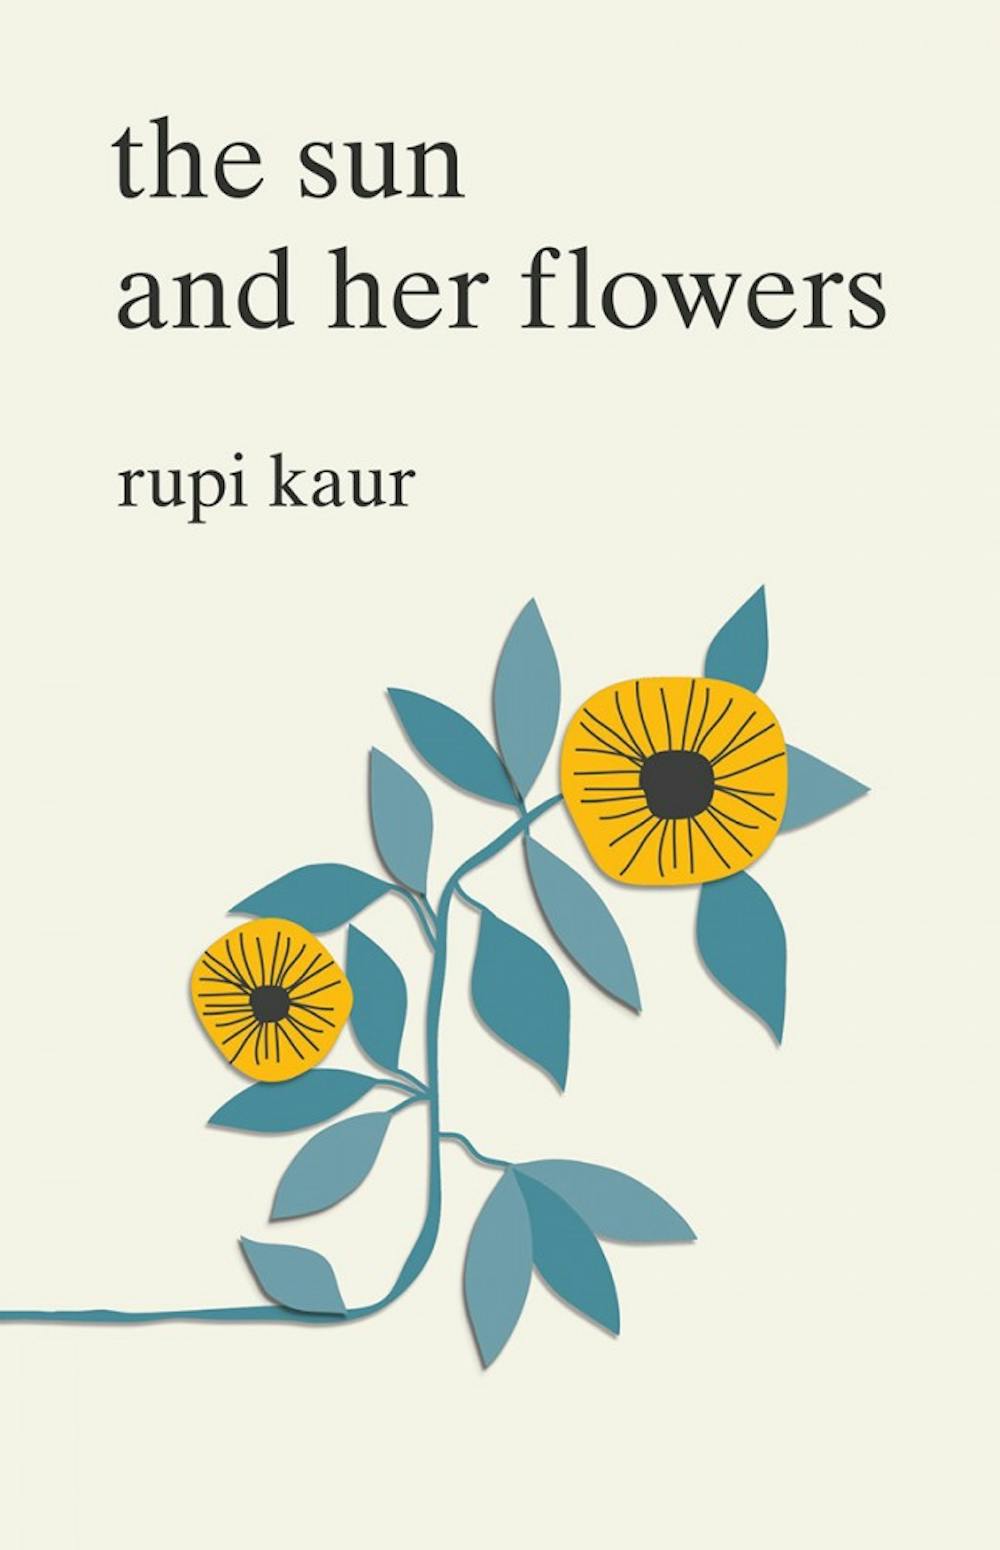 <p>&nbsp;Kaur’s work is primarily valuable in making poetry accessible for younger social media users.&nbsp;</p>